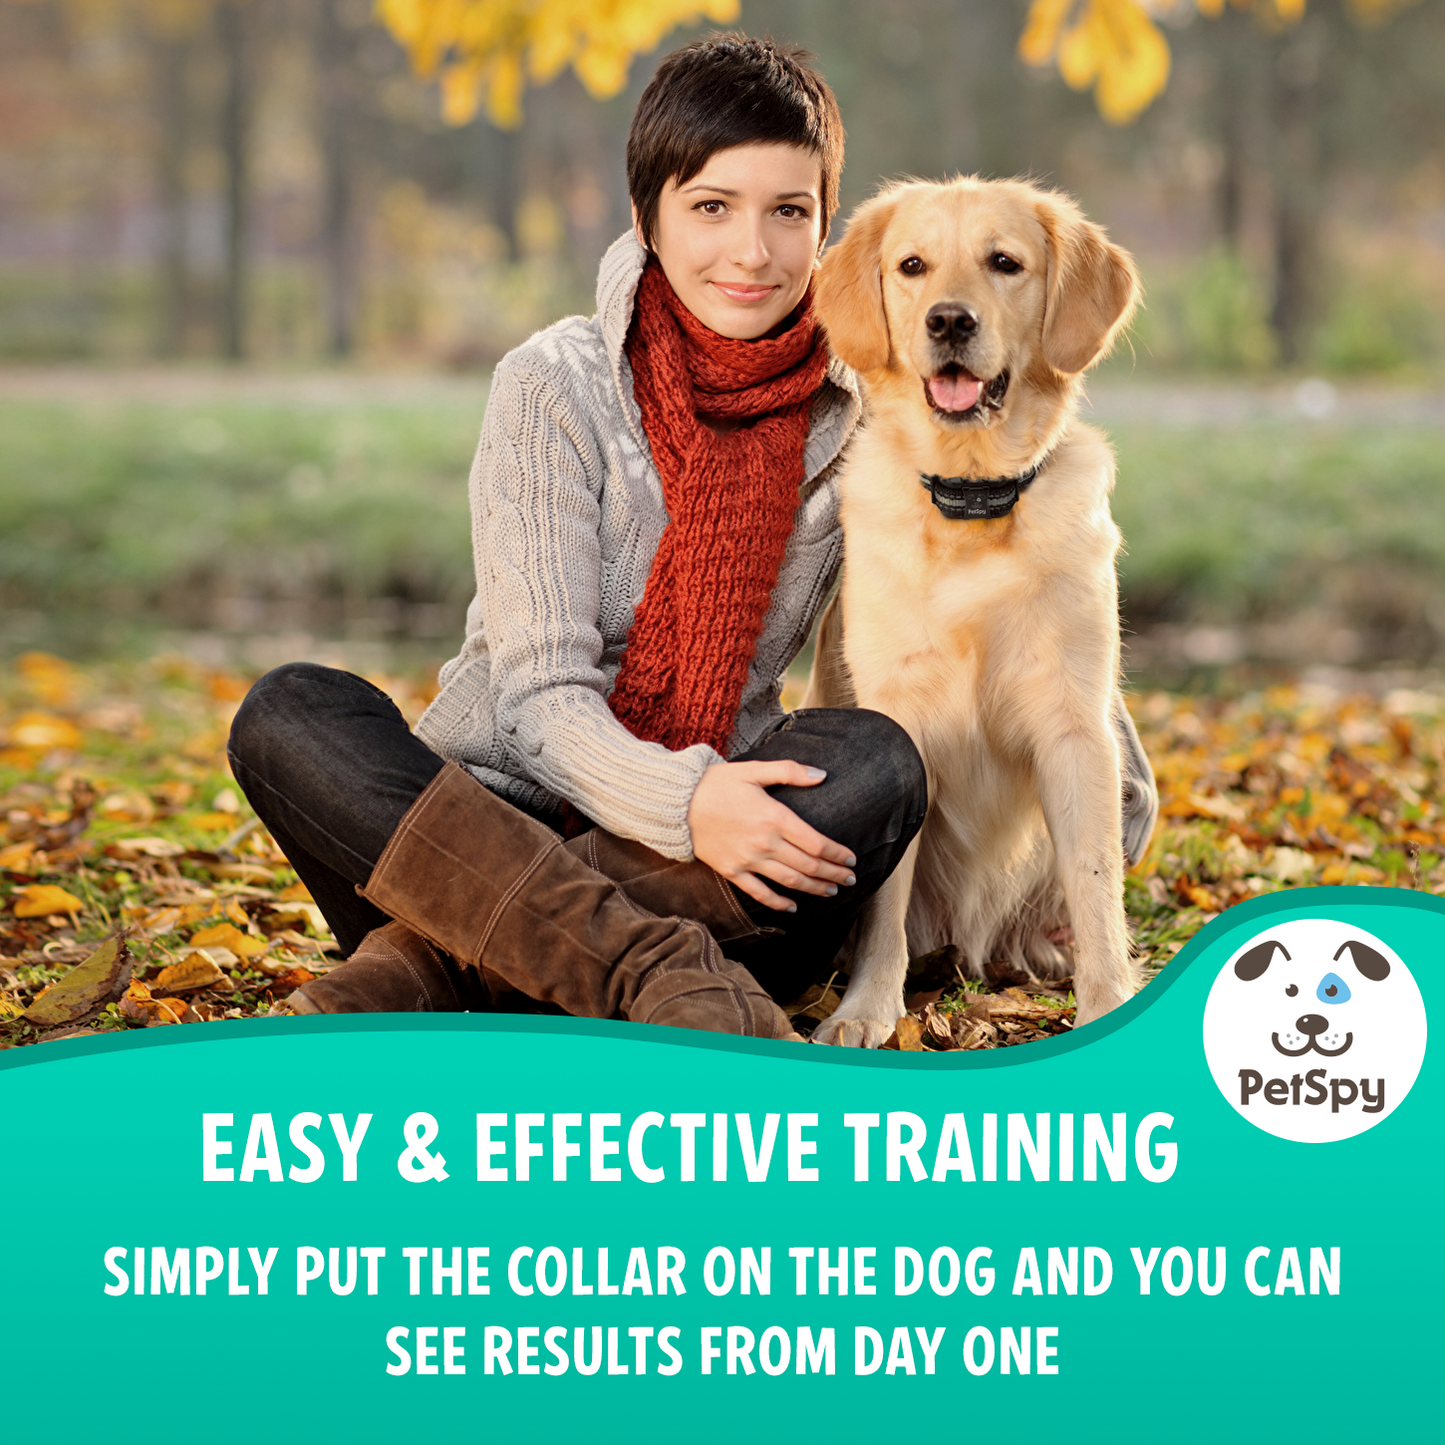 easy and effective training with smart bark control collar. Simply put the collar on the dog and you can see results from day one